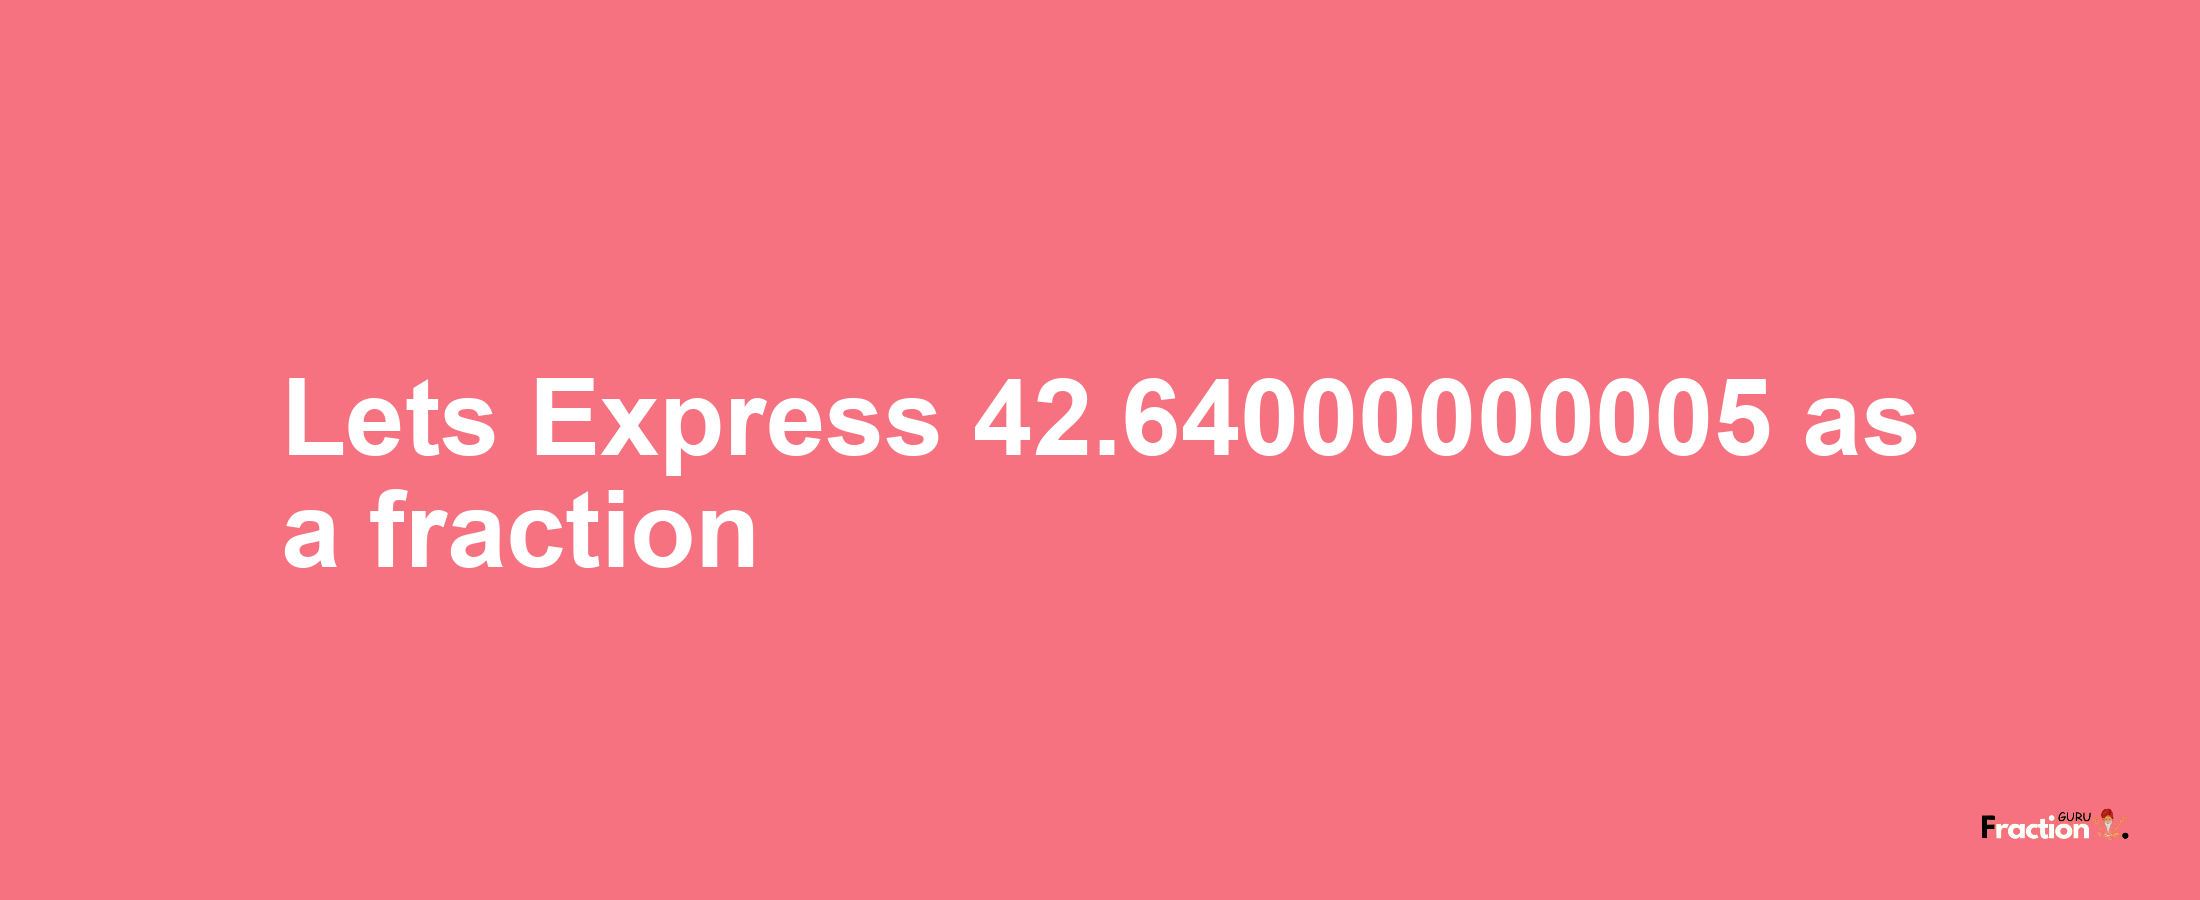 Lets Express 42.64000000005 as afraction